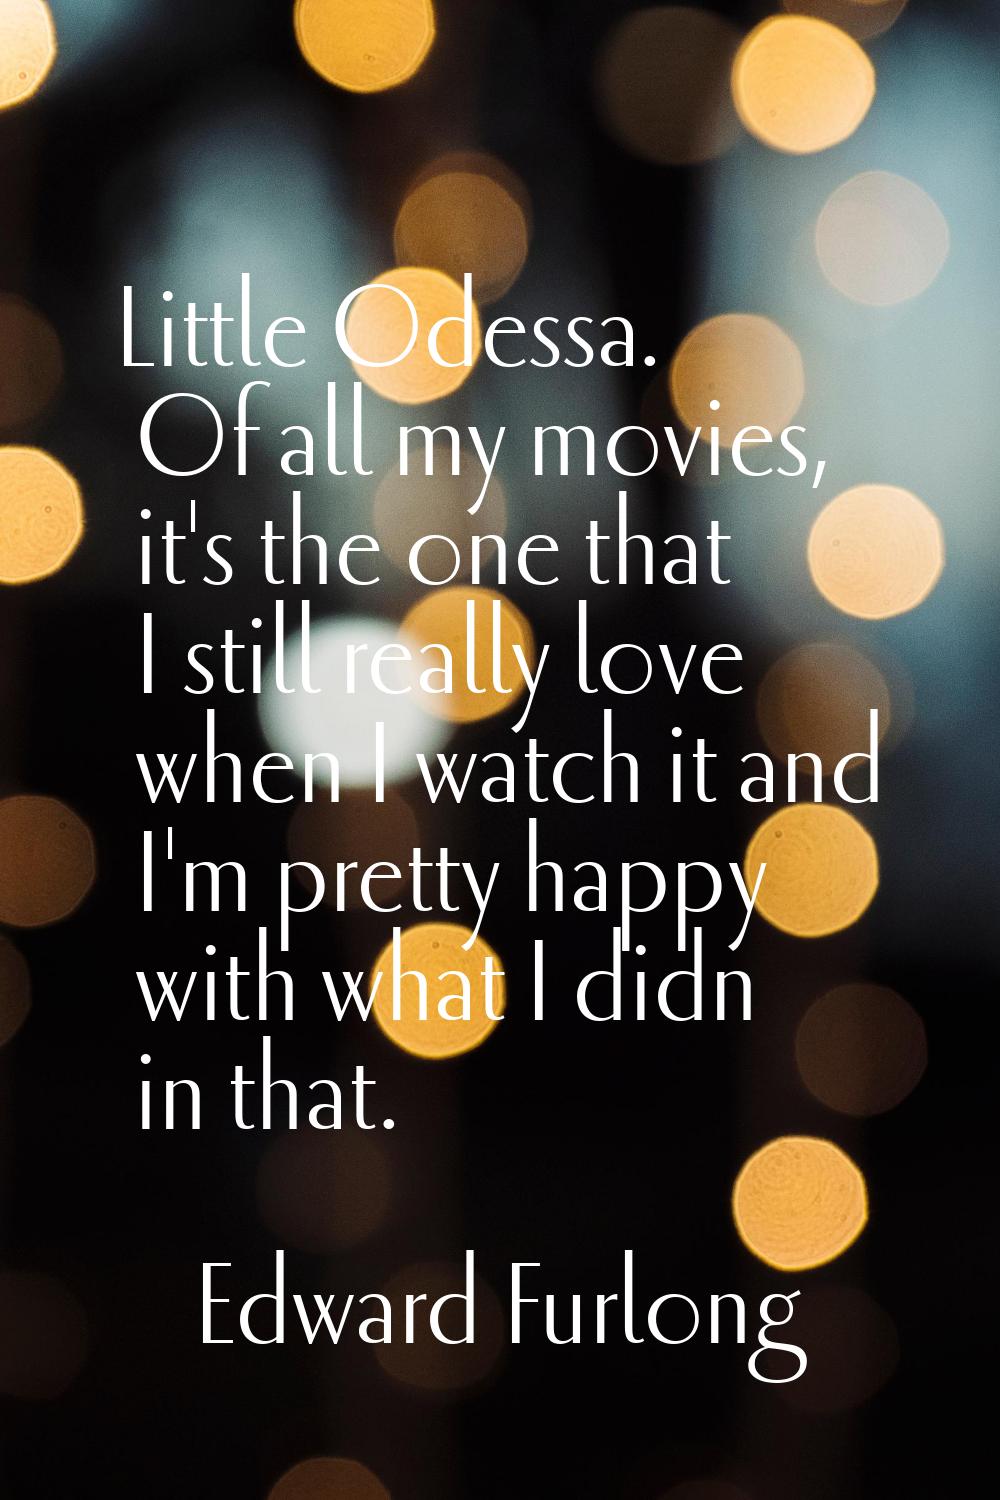 Little Odessa. Of all my movies, it's the one that I still really love when I watch it and I'm pret